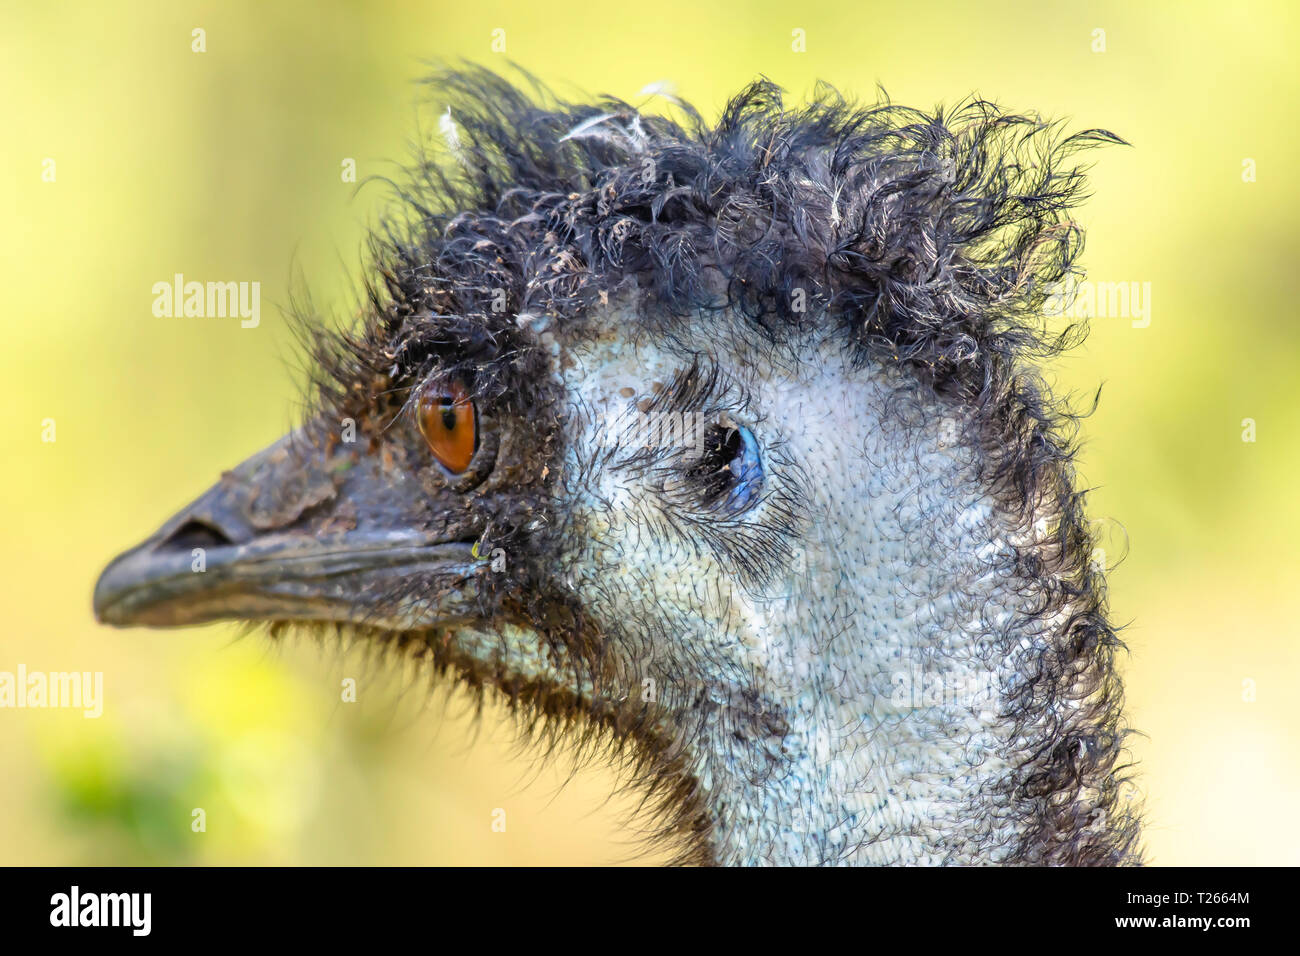 Close up profile portrait of emu ostrich looking right.Blurred background.Animal head.Wildlife photography.Largest, flightless specie of bird. Stock Photo